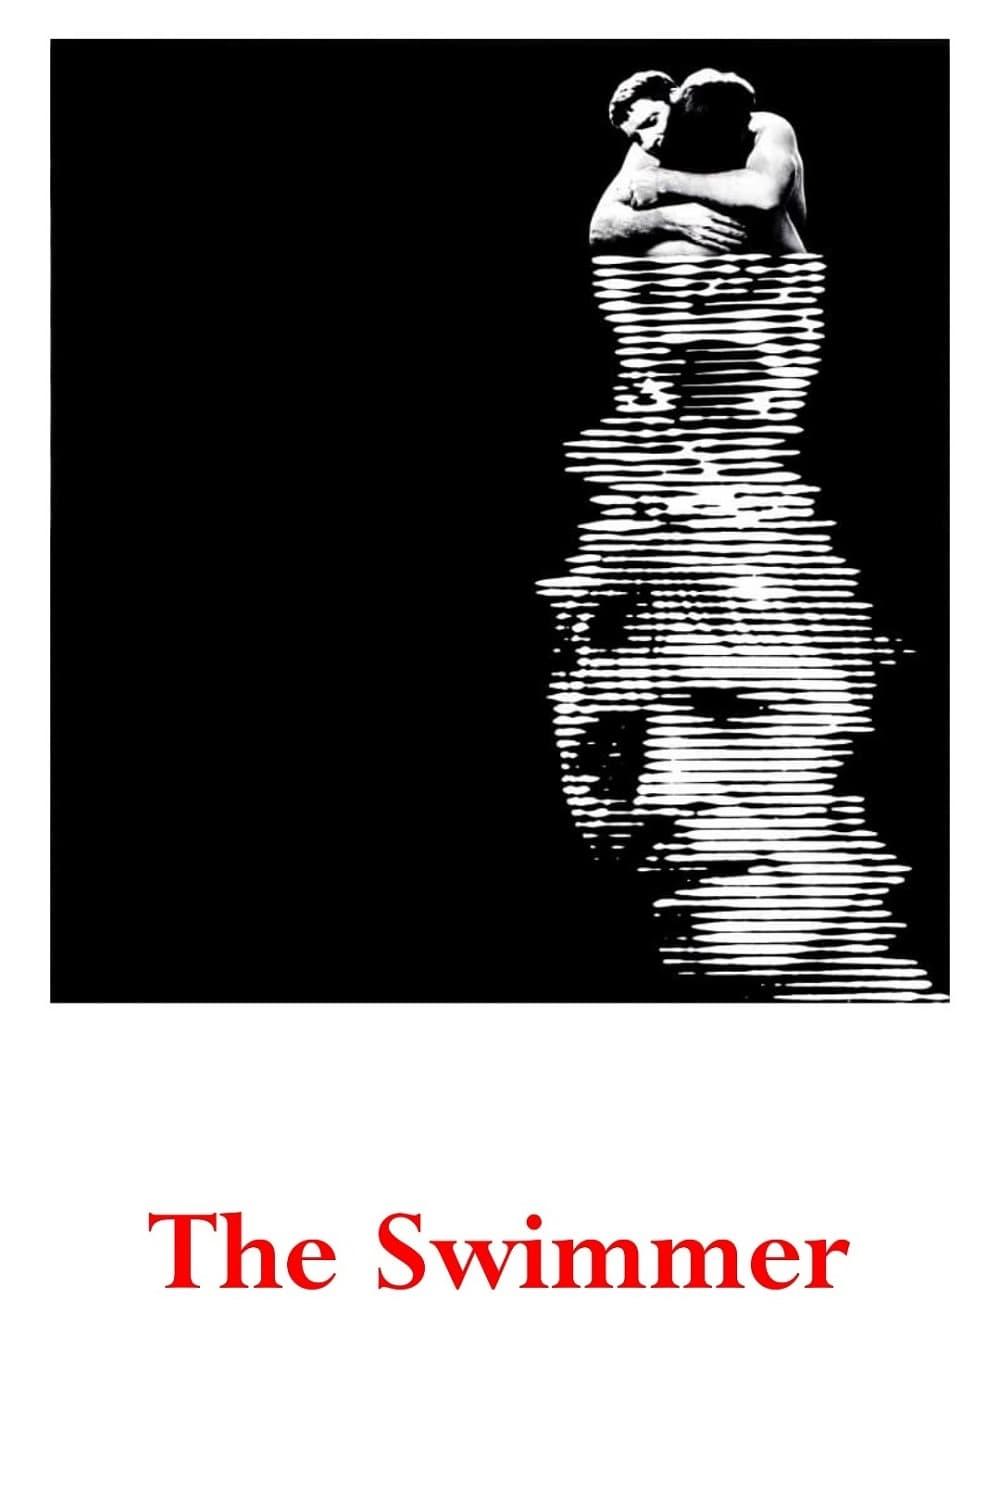 The Swimmer poster